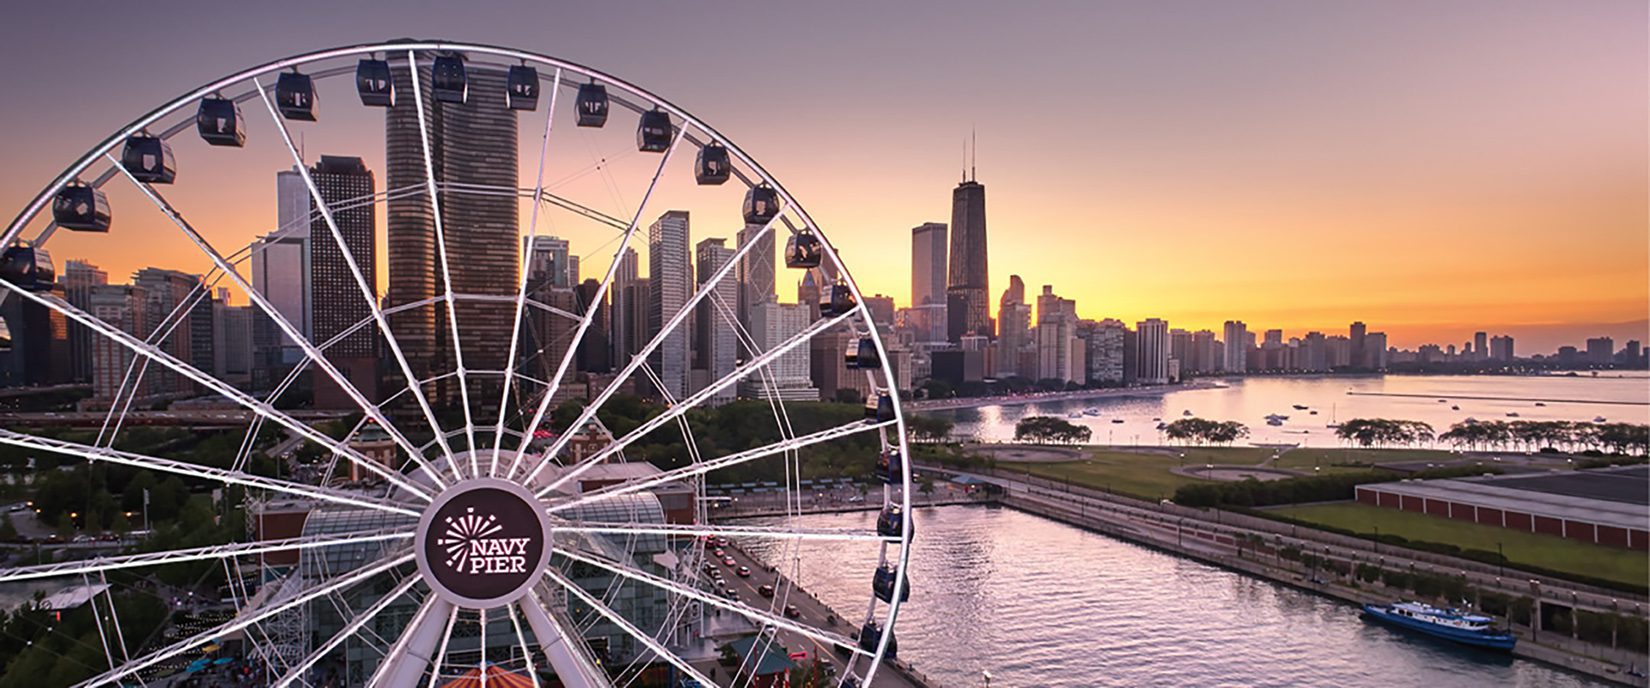 Navy Pier Celebrates Lifting of Mask Mandate by Giving Free Centennial Wheel Rides in Exchange for a Smile on Monday, Feb. 28